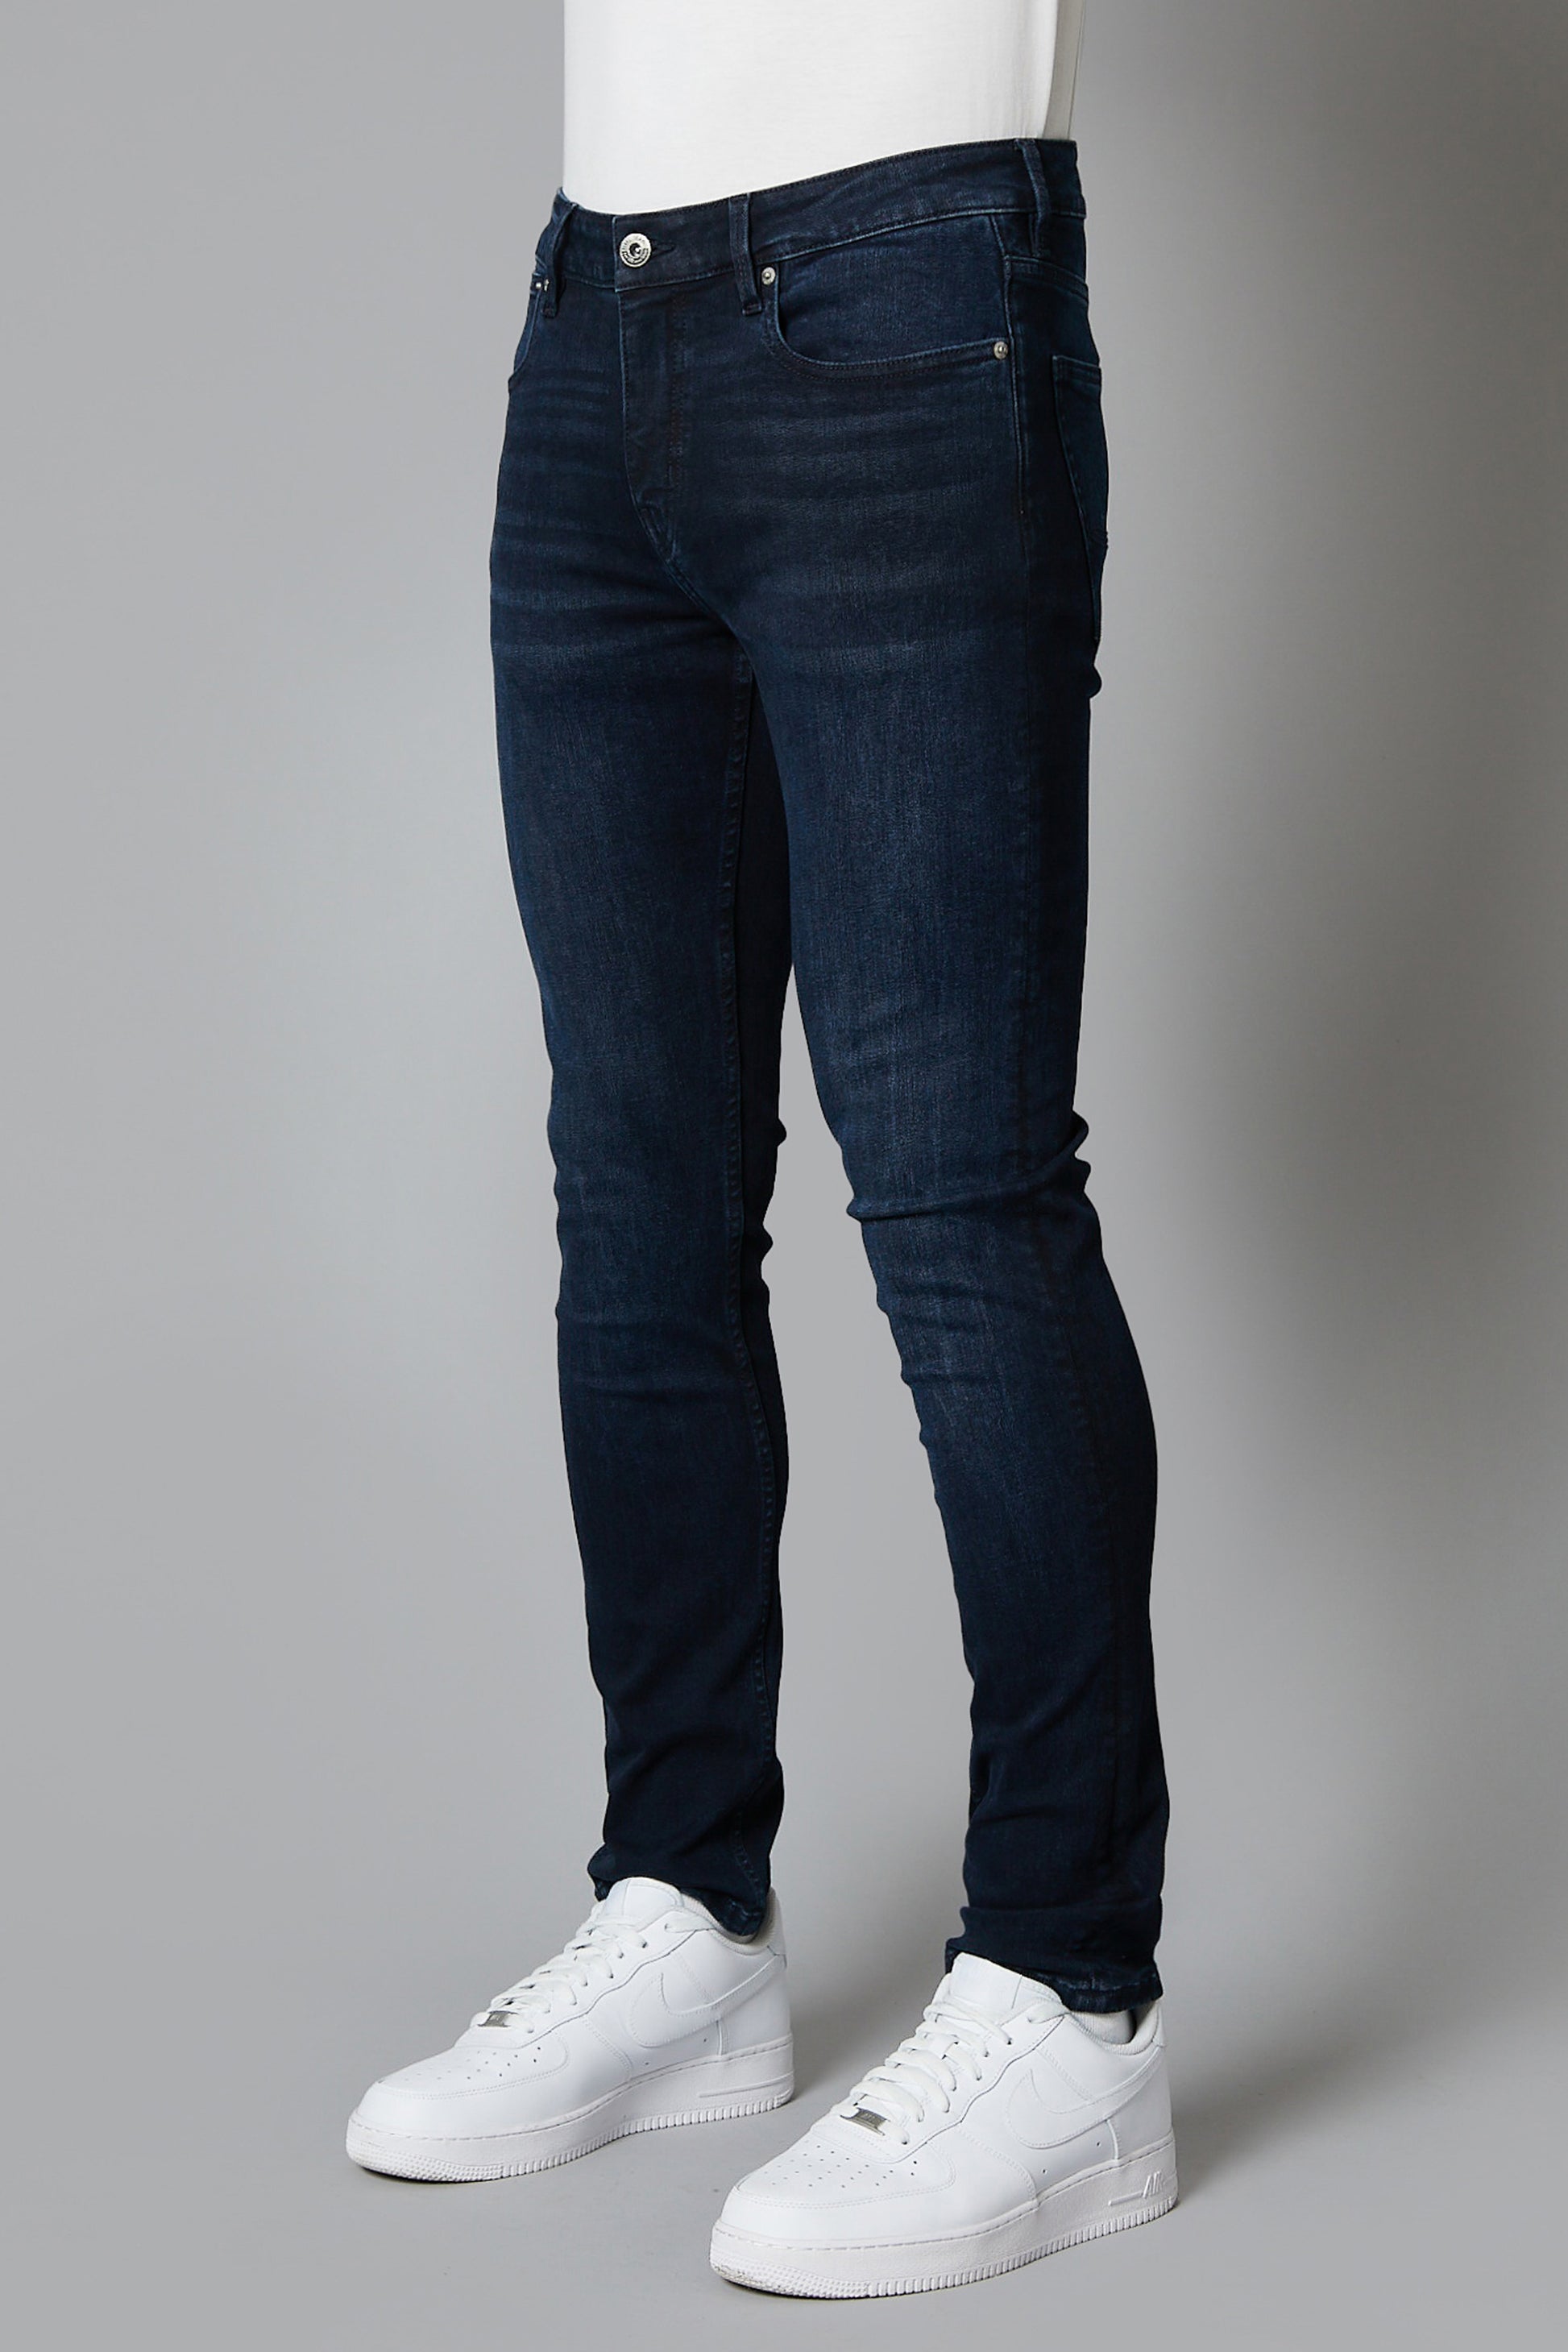 DML Jeans Nevada Skinny Fit Jeans In Ink Blue